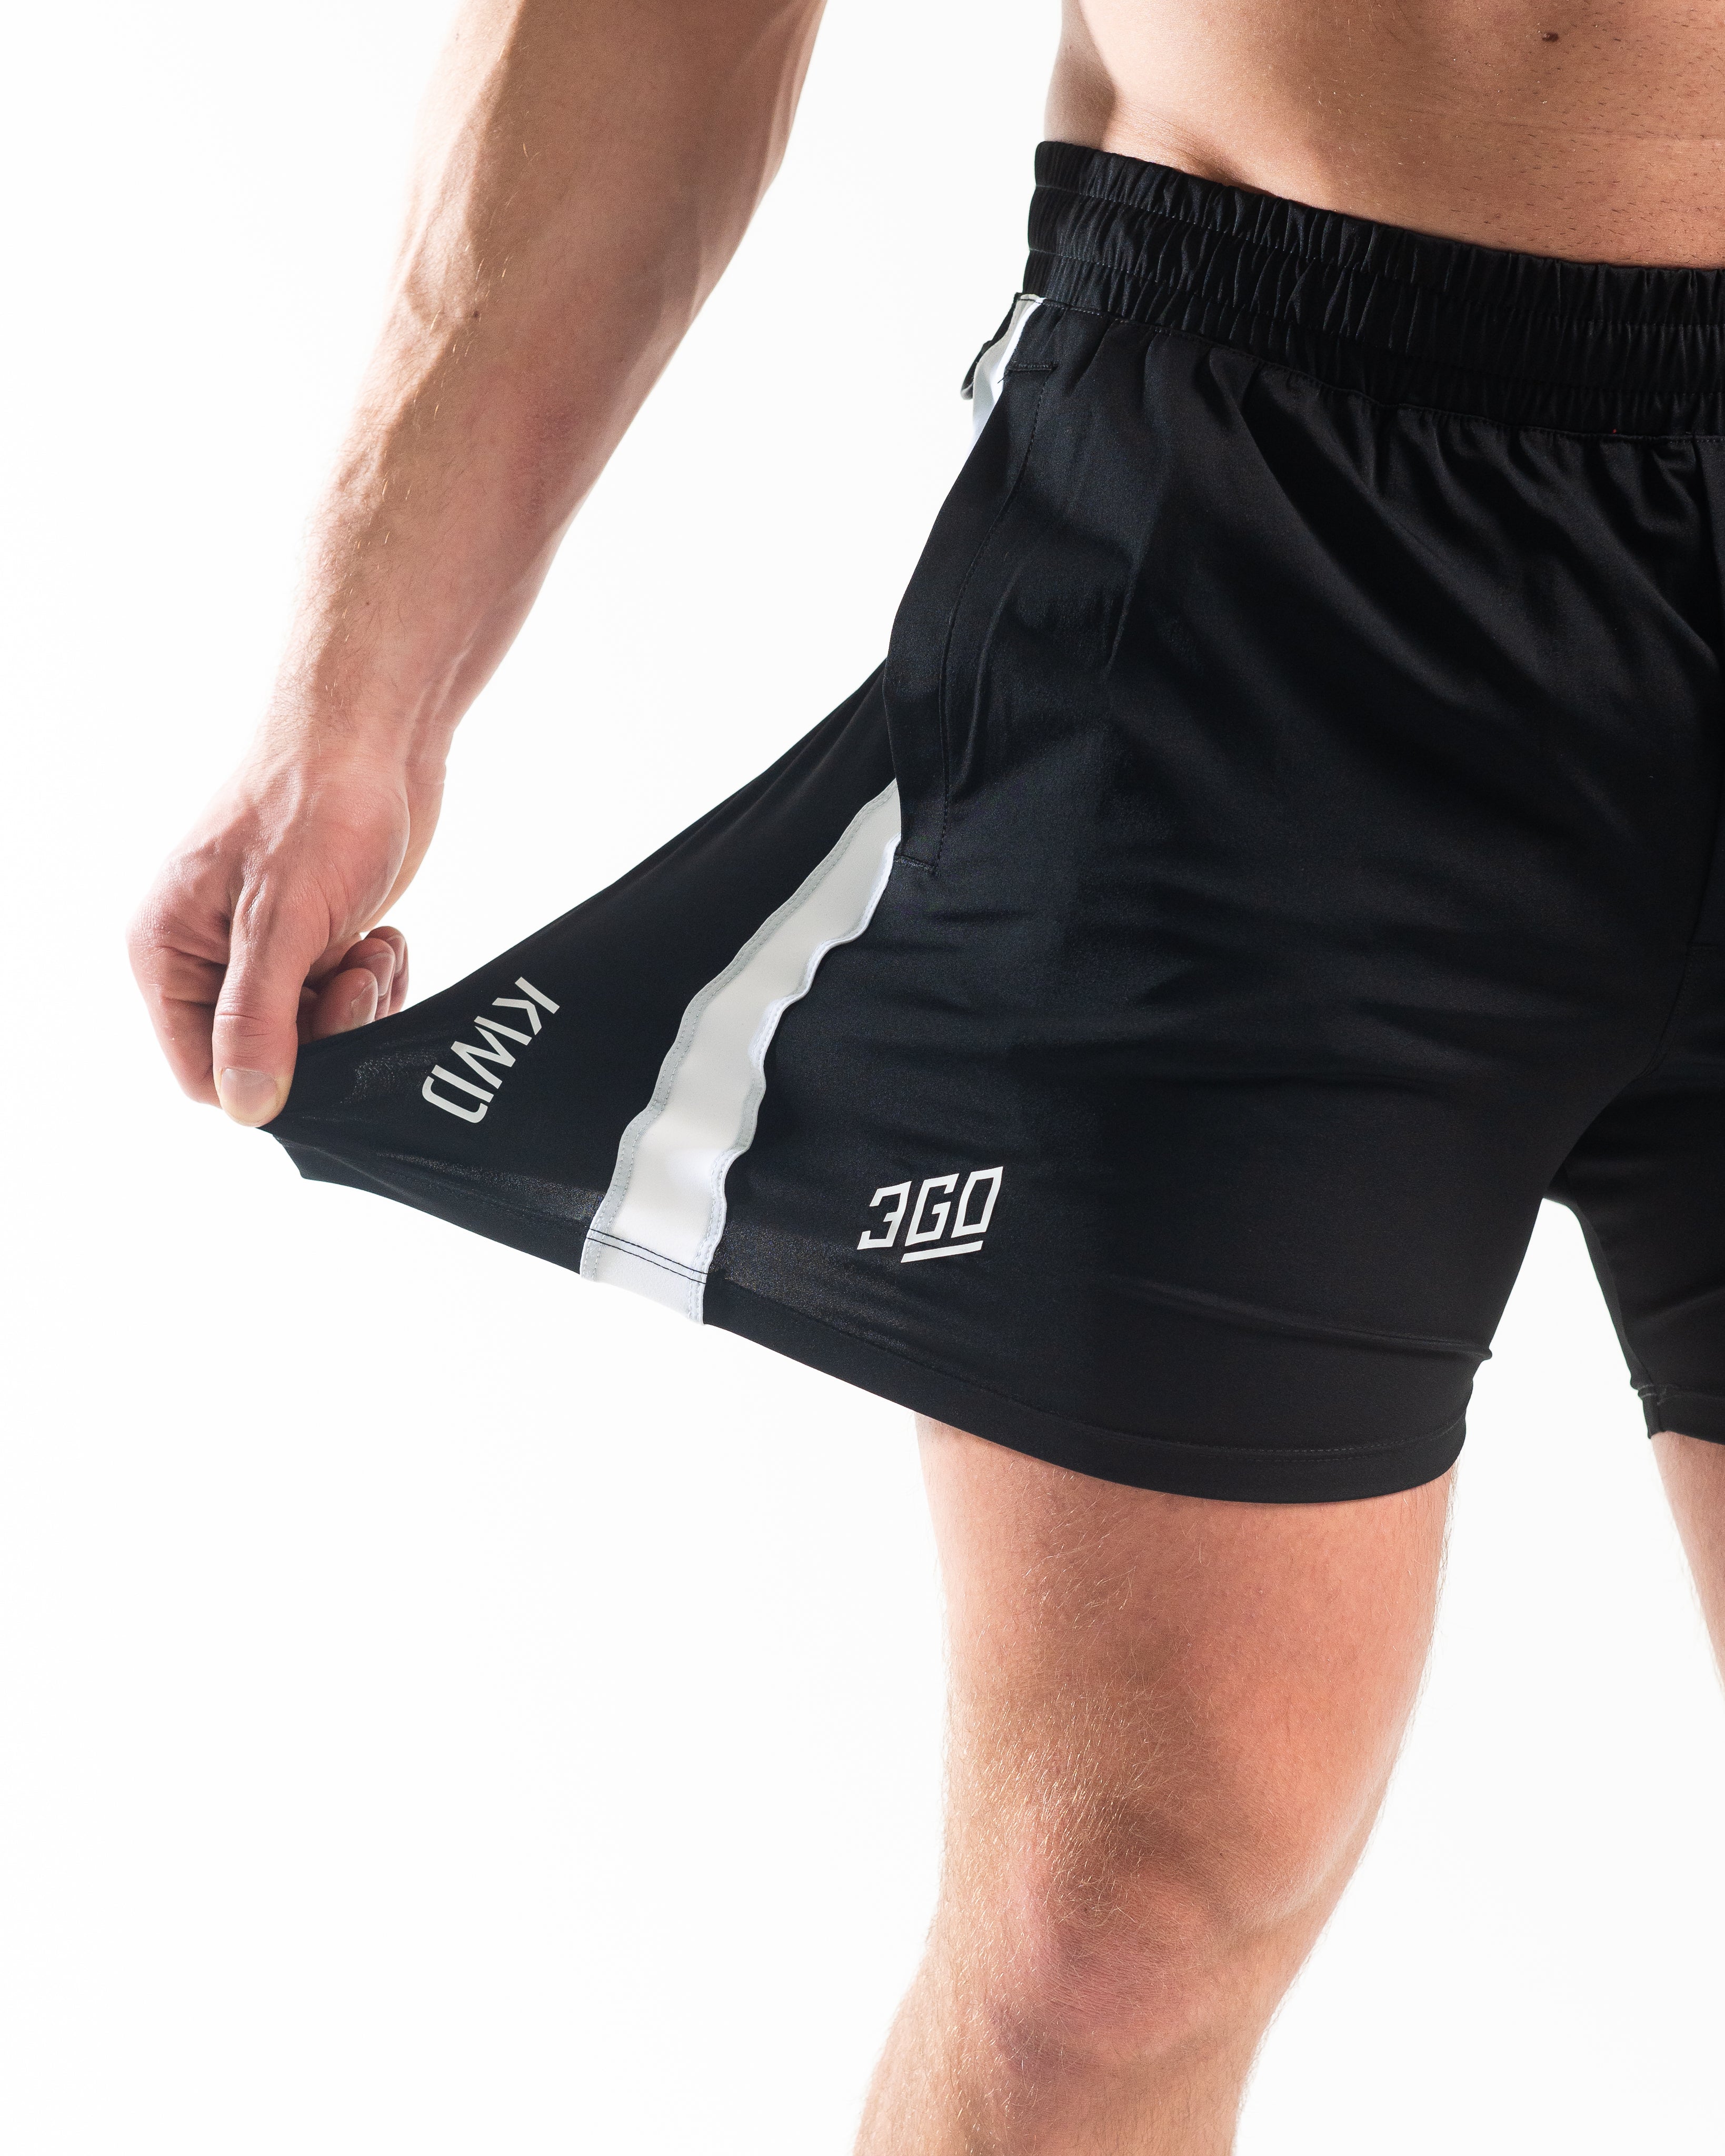 360GO was created to provide the flexibility for all movements in your training while offering comfort. These shorts offer 360 degrees of stretch in all angles and allow you to remain comfortable without limiting any movement in both training and life environments. Designed with a wide drawstring to easily adjust your waist without slipping. Purchase 360GO Domino Squat Shorts from A7 Europe. Genouillères powerlifting shipping to France, Spain, Ireland, Germany, Italy, Sweden and EU.